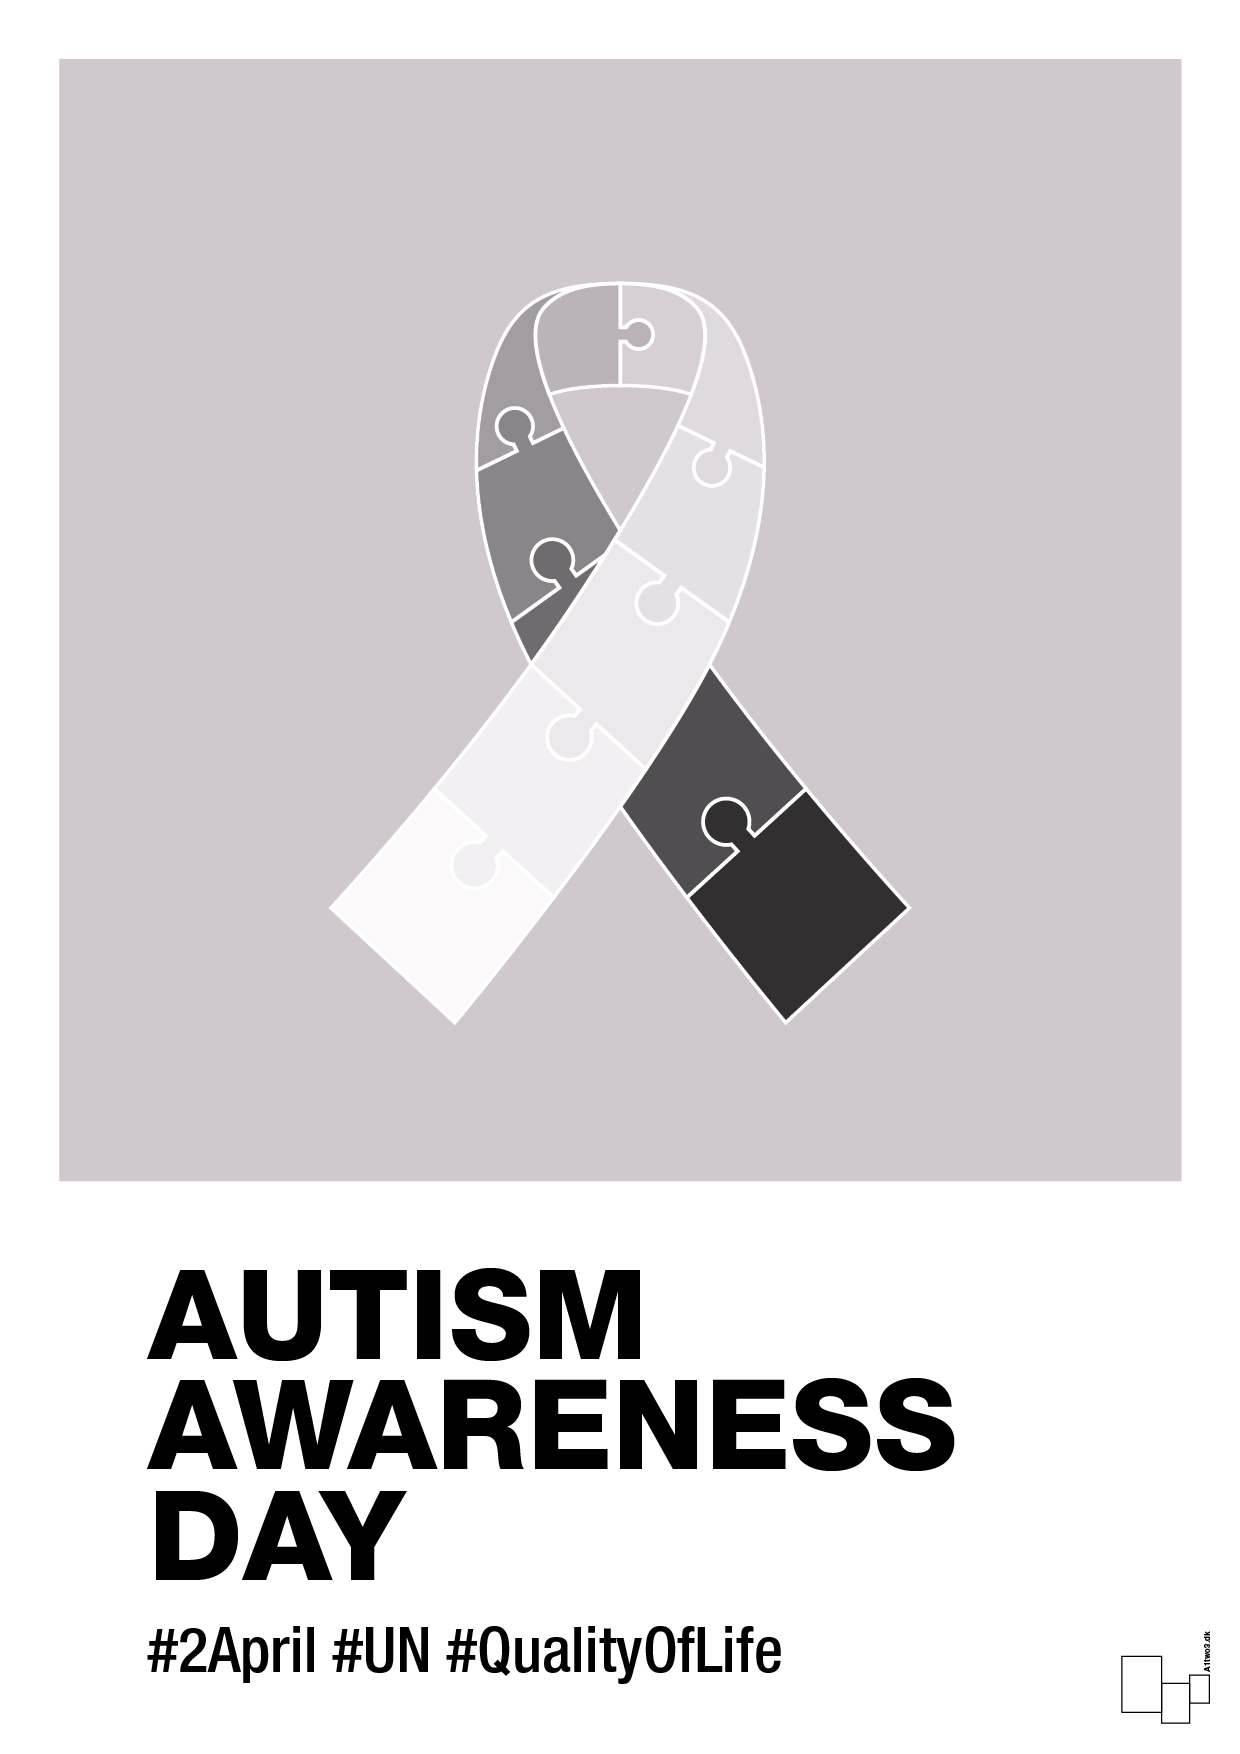 autism awareness day in monocolor - Plakat med Samfund i Dusty Lilac